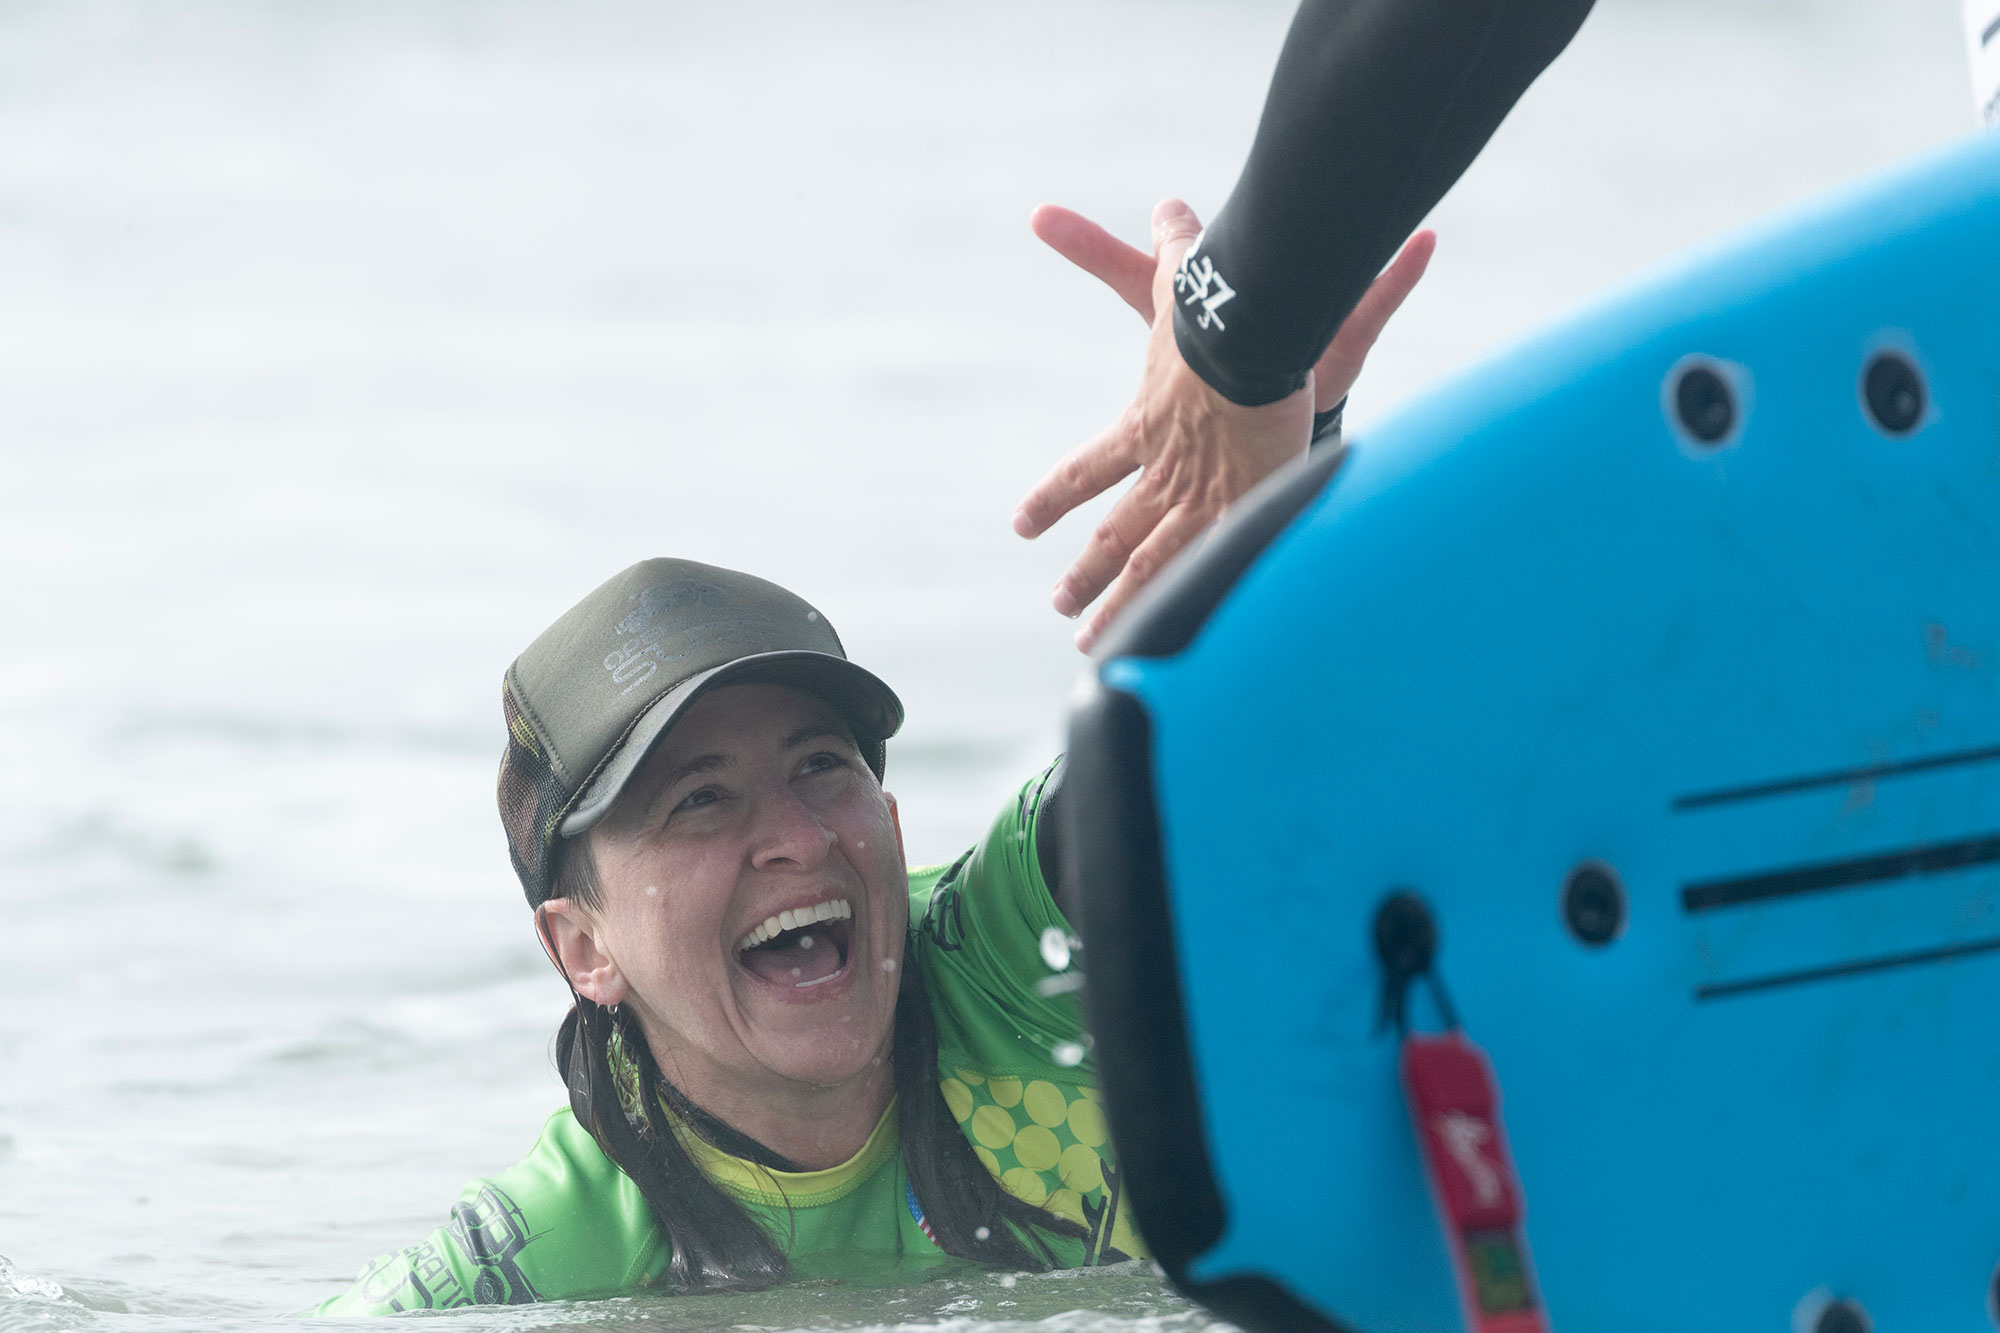 Stephanie, veteran, in water with Operation Surf